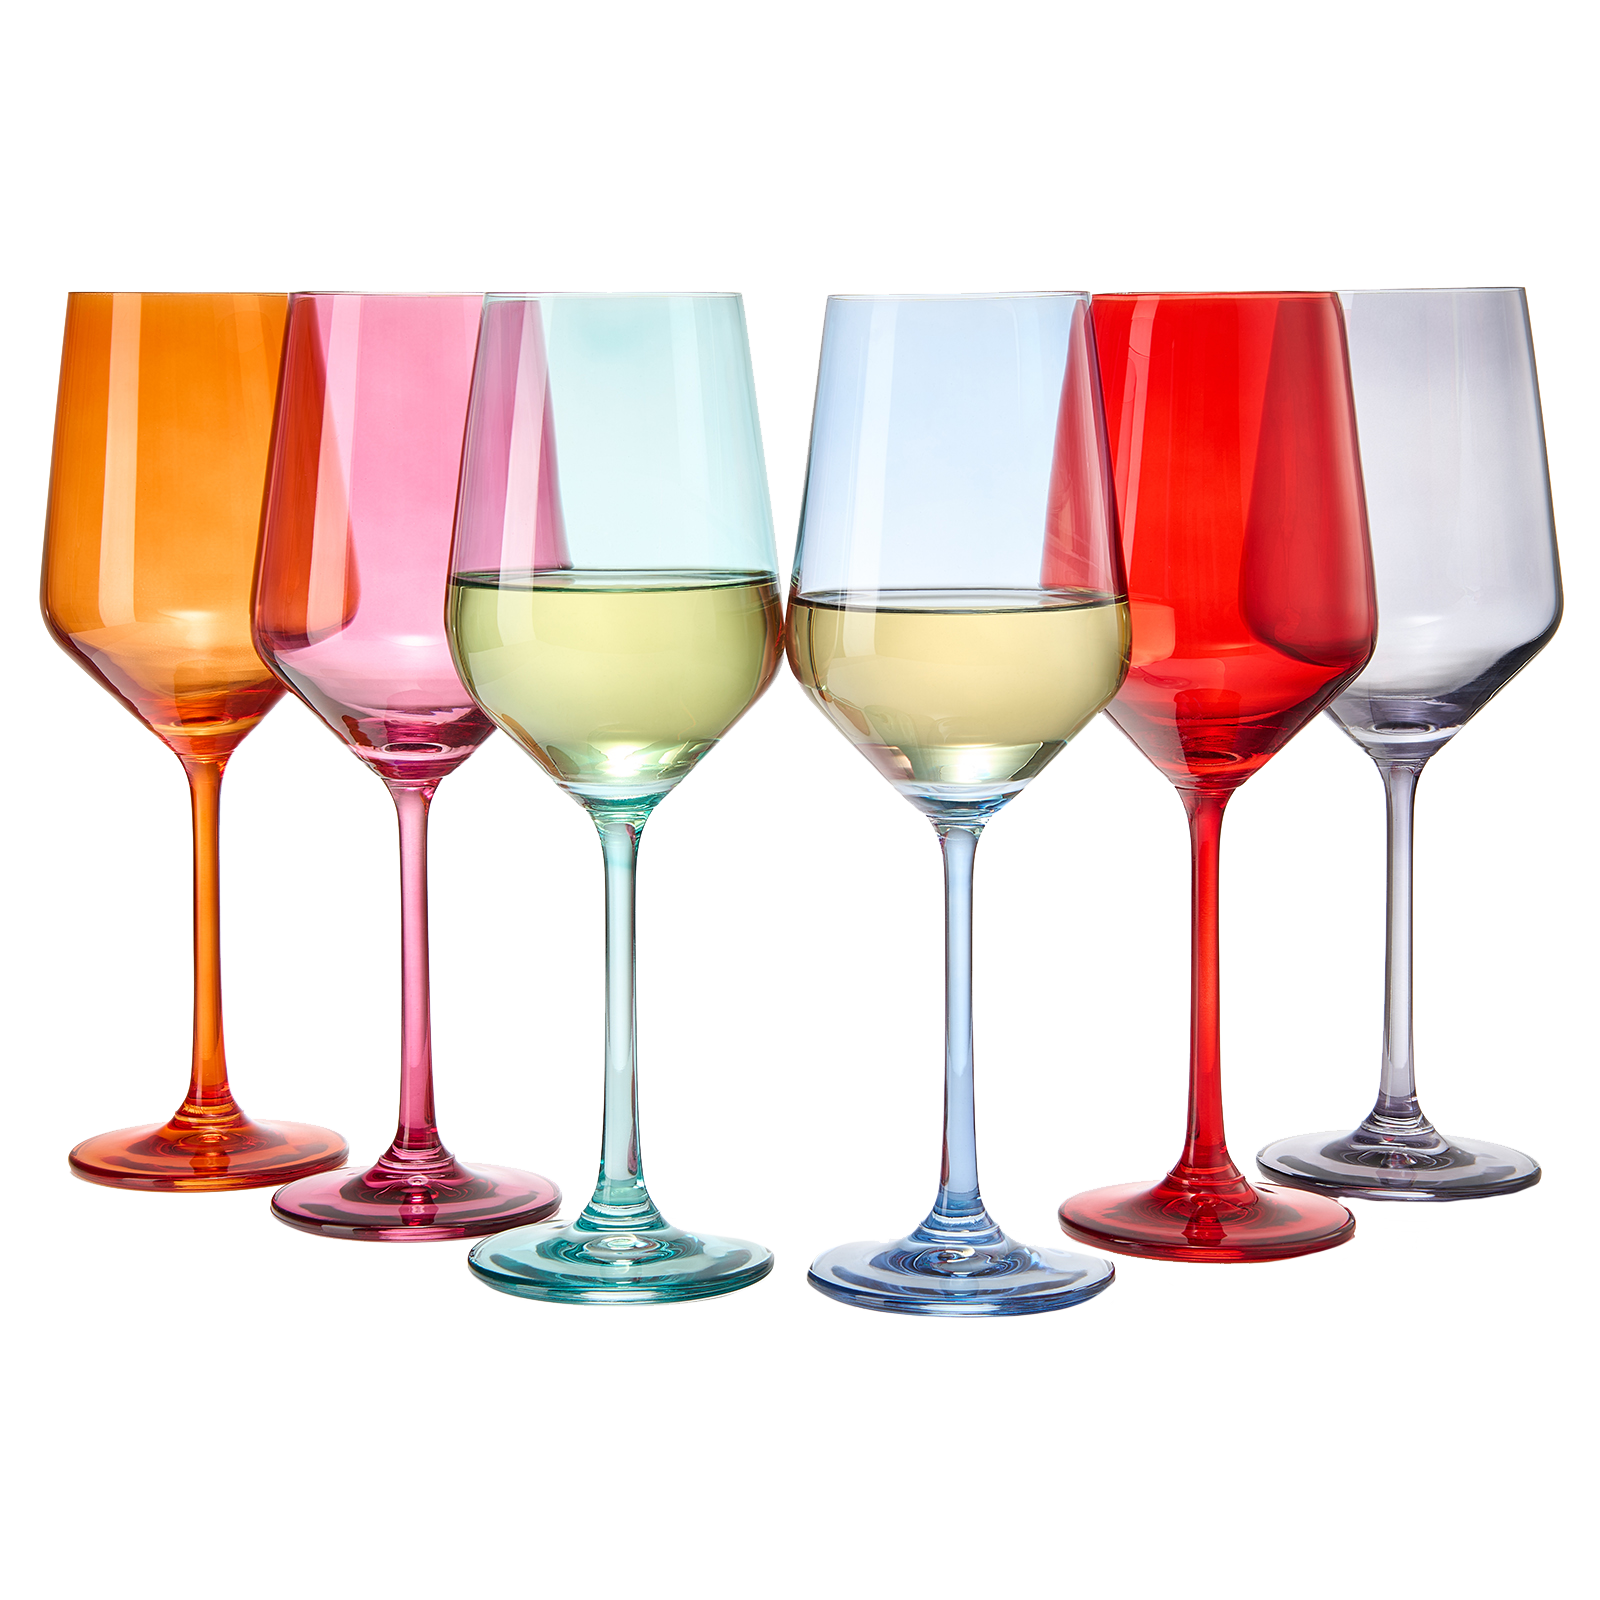 Everything Collection - Shop This Versatile Set of 12 Colored Wine